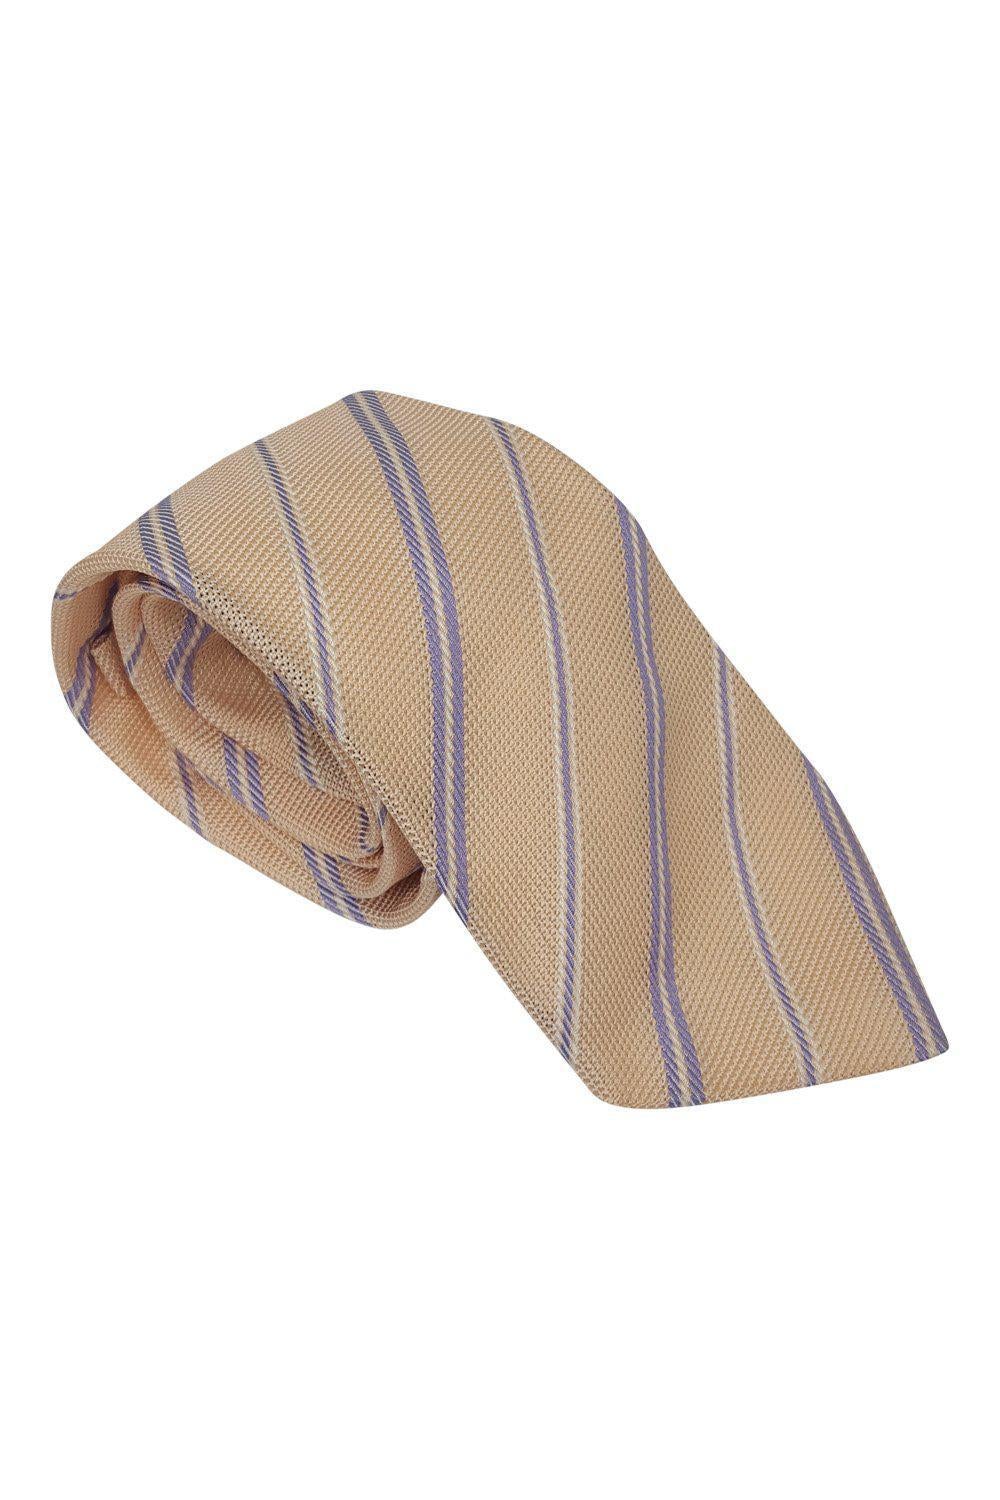 UNBRANDED Silk Salmon Pink Tie Diagonal Stripe Repeat (65")-Unbranded-The Freperie